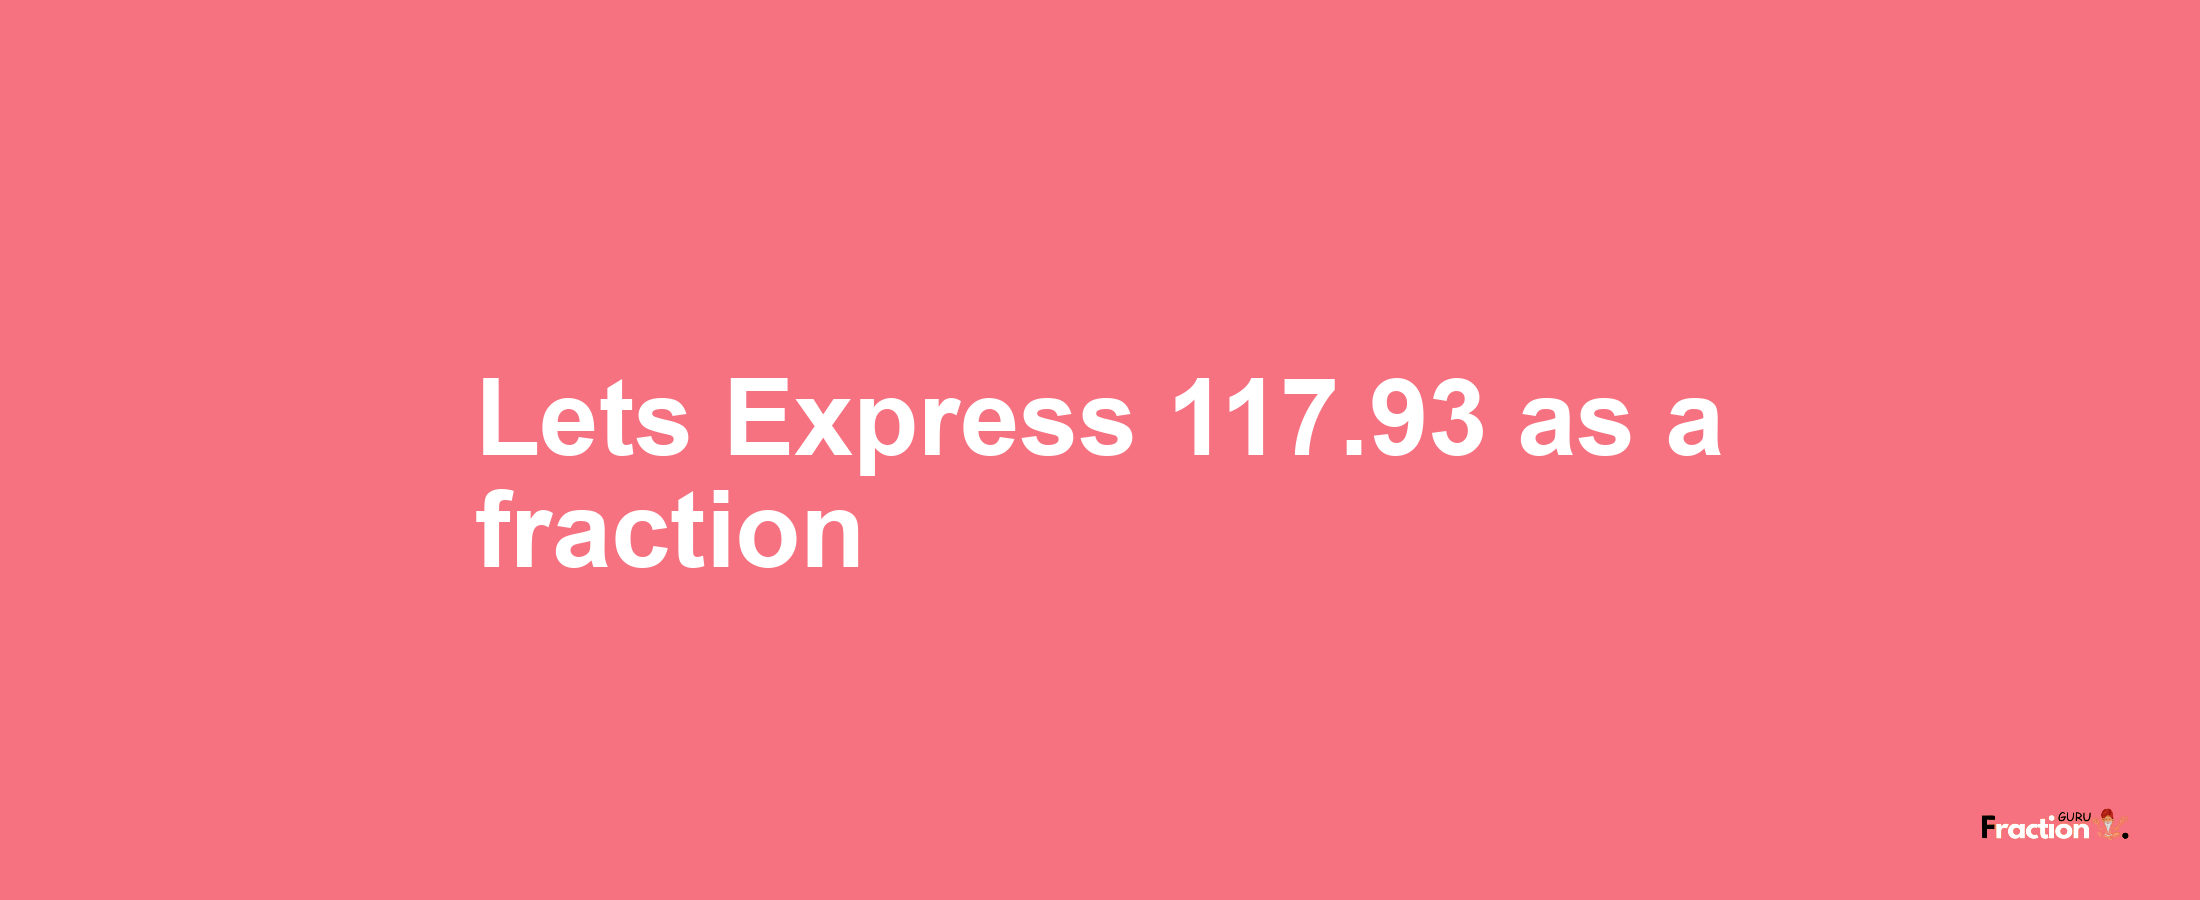 Lets Express 117.93 as afraction